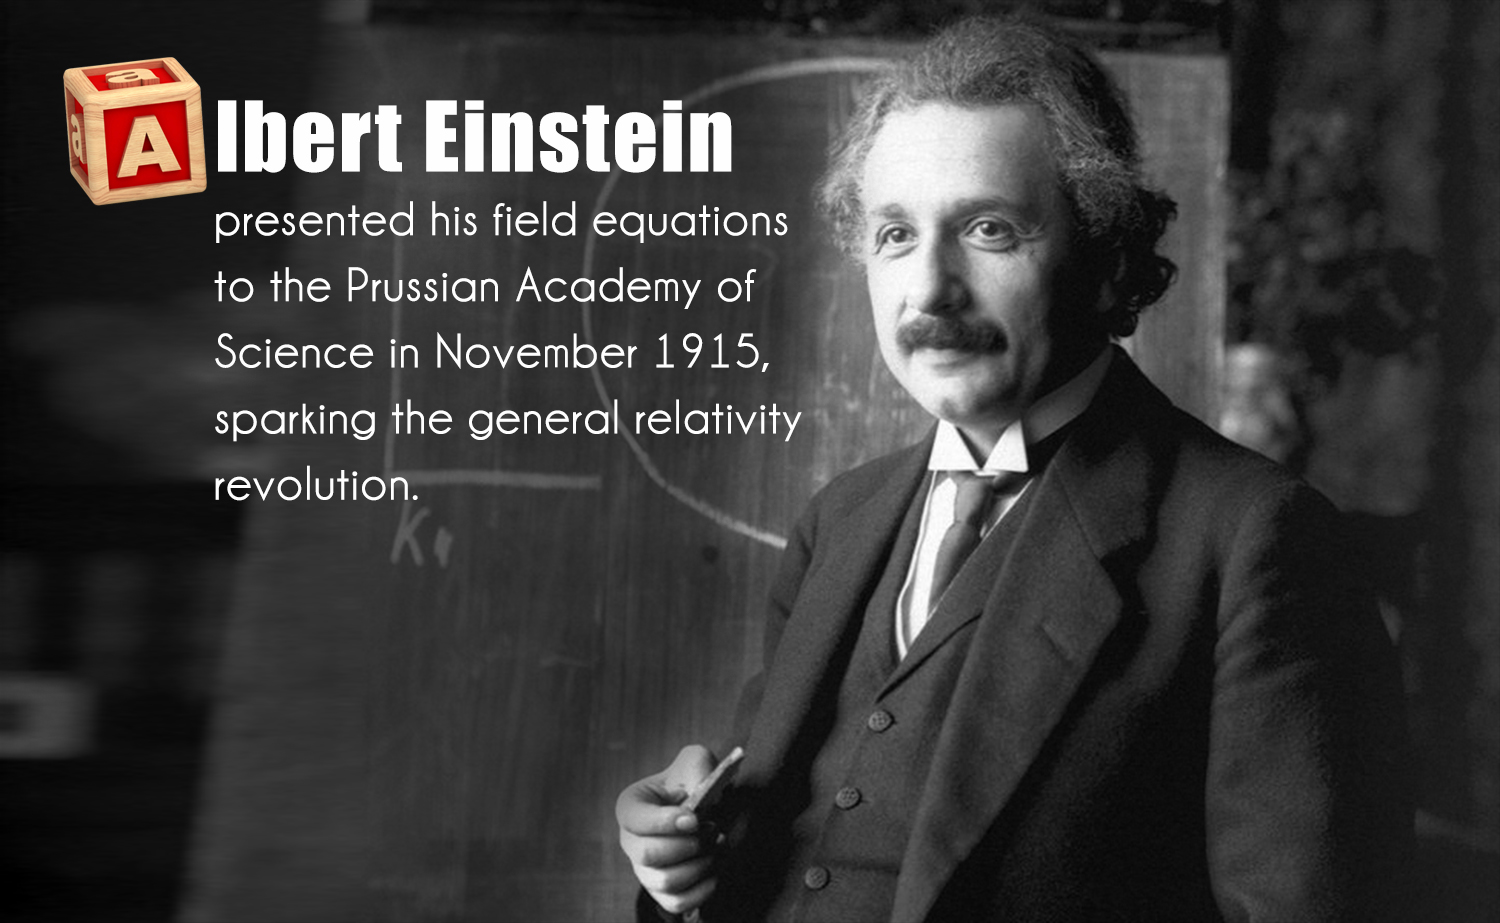 Albert Einstein presented his fiel equations to the Prussian Academy of Science in November 1915, sparking the general relativity revolution.